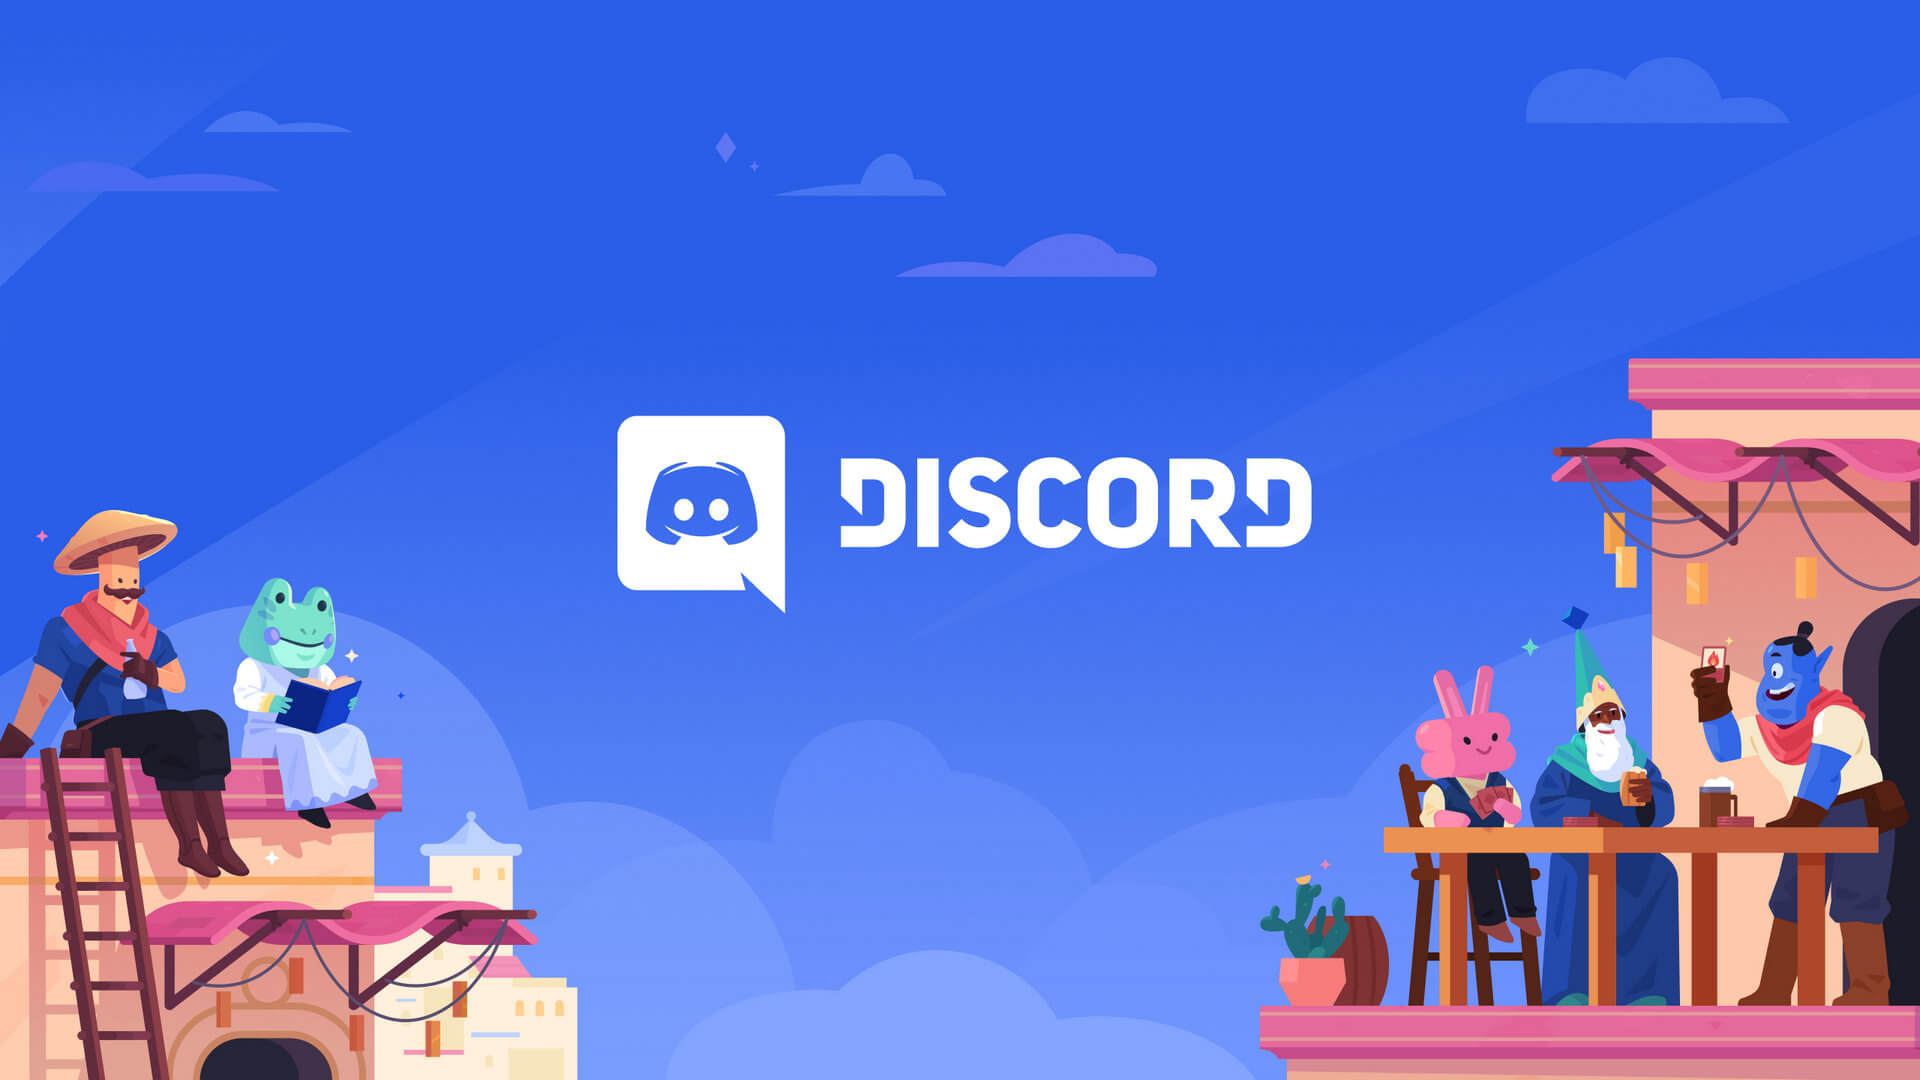 Discord Fails To Take Action Against Server Coordinating Costly Mastodon Spam Attacks